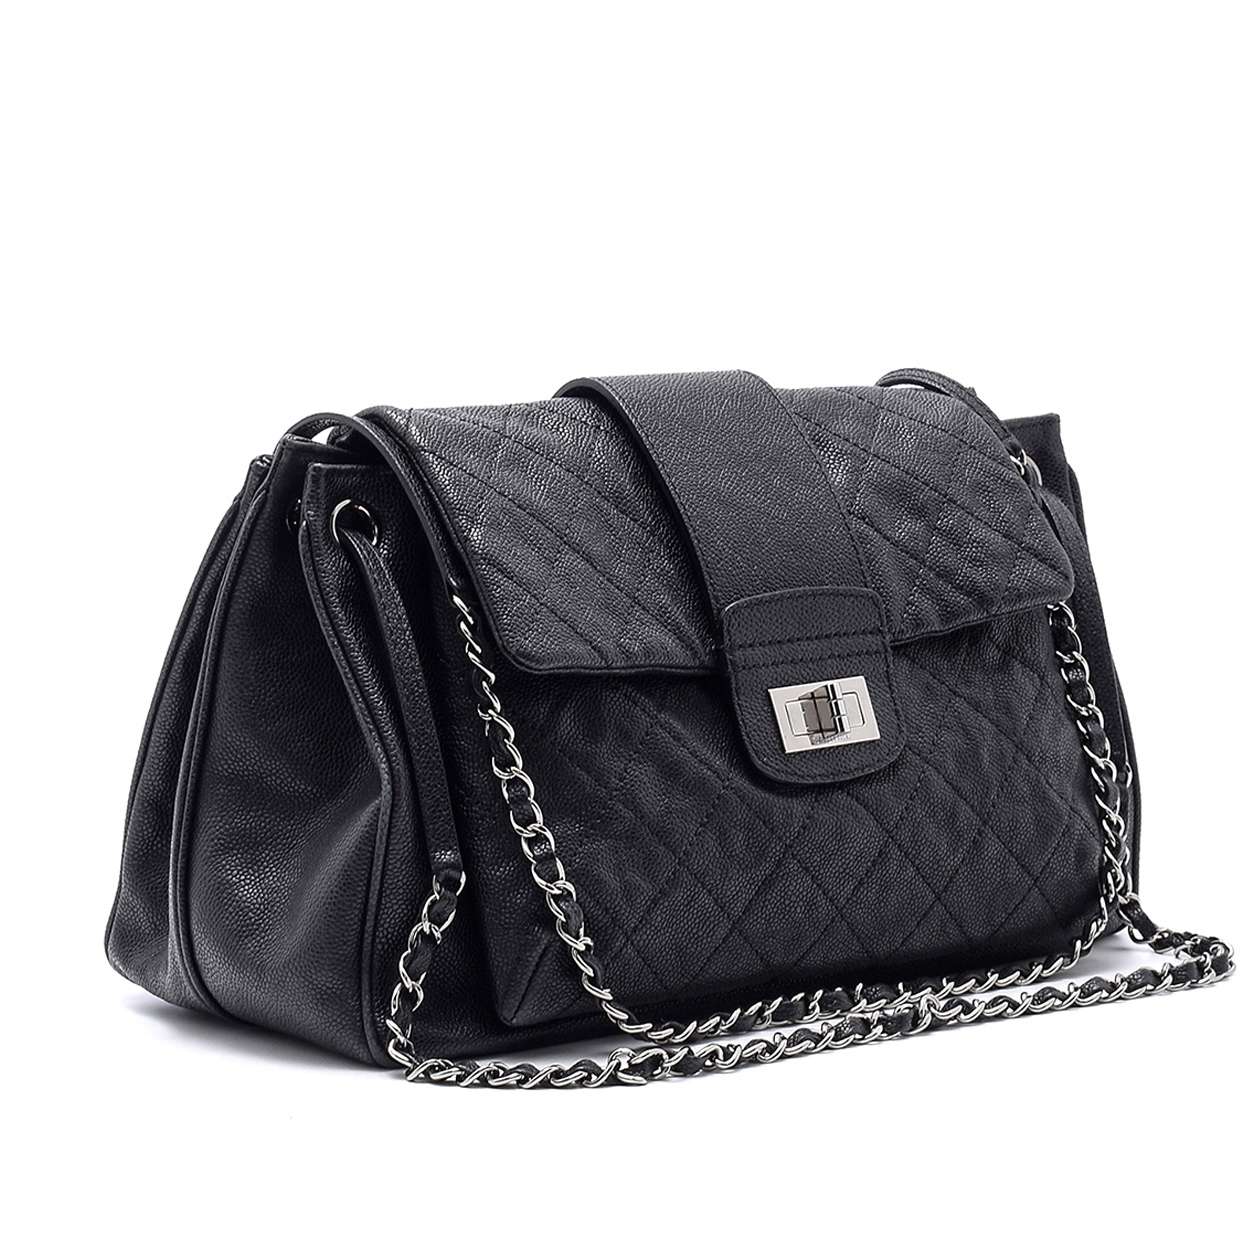 Chanel - Black Quilted Caviar Leather Reissue Shoulder  Bag